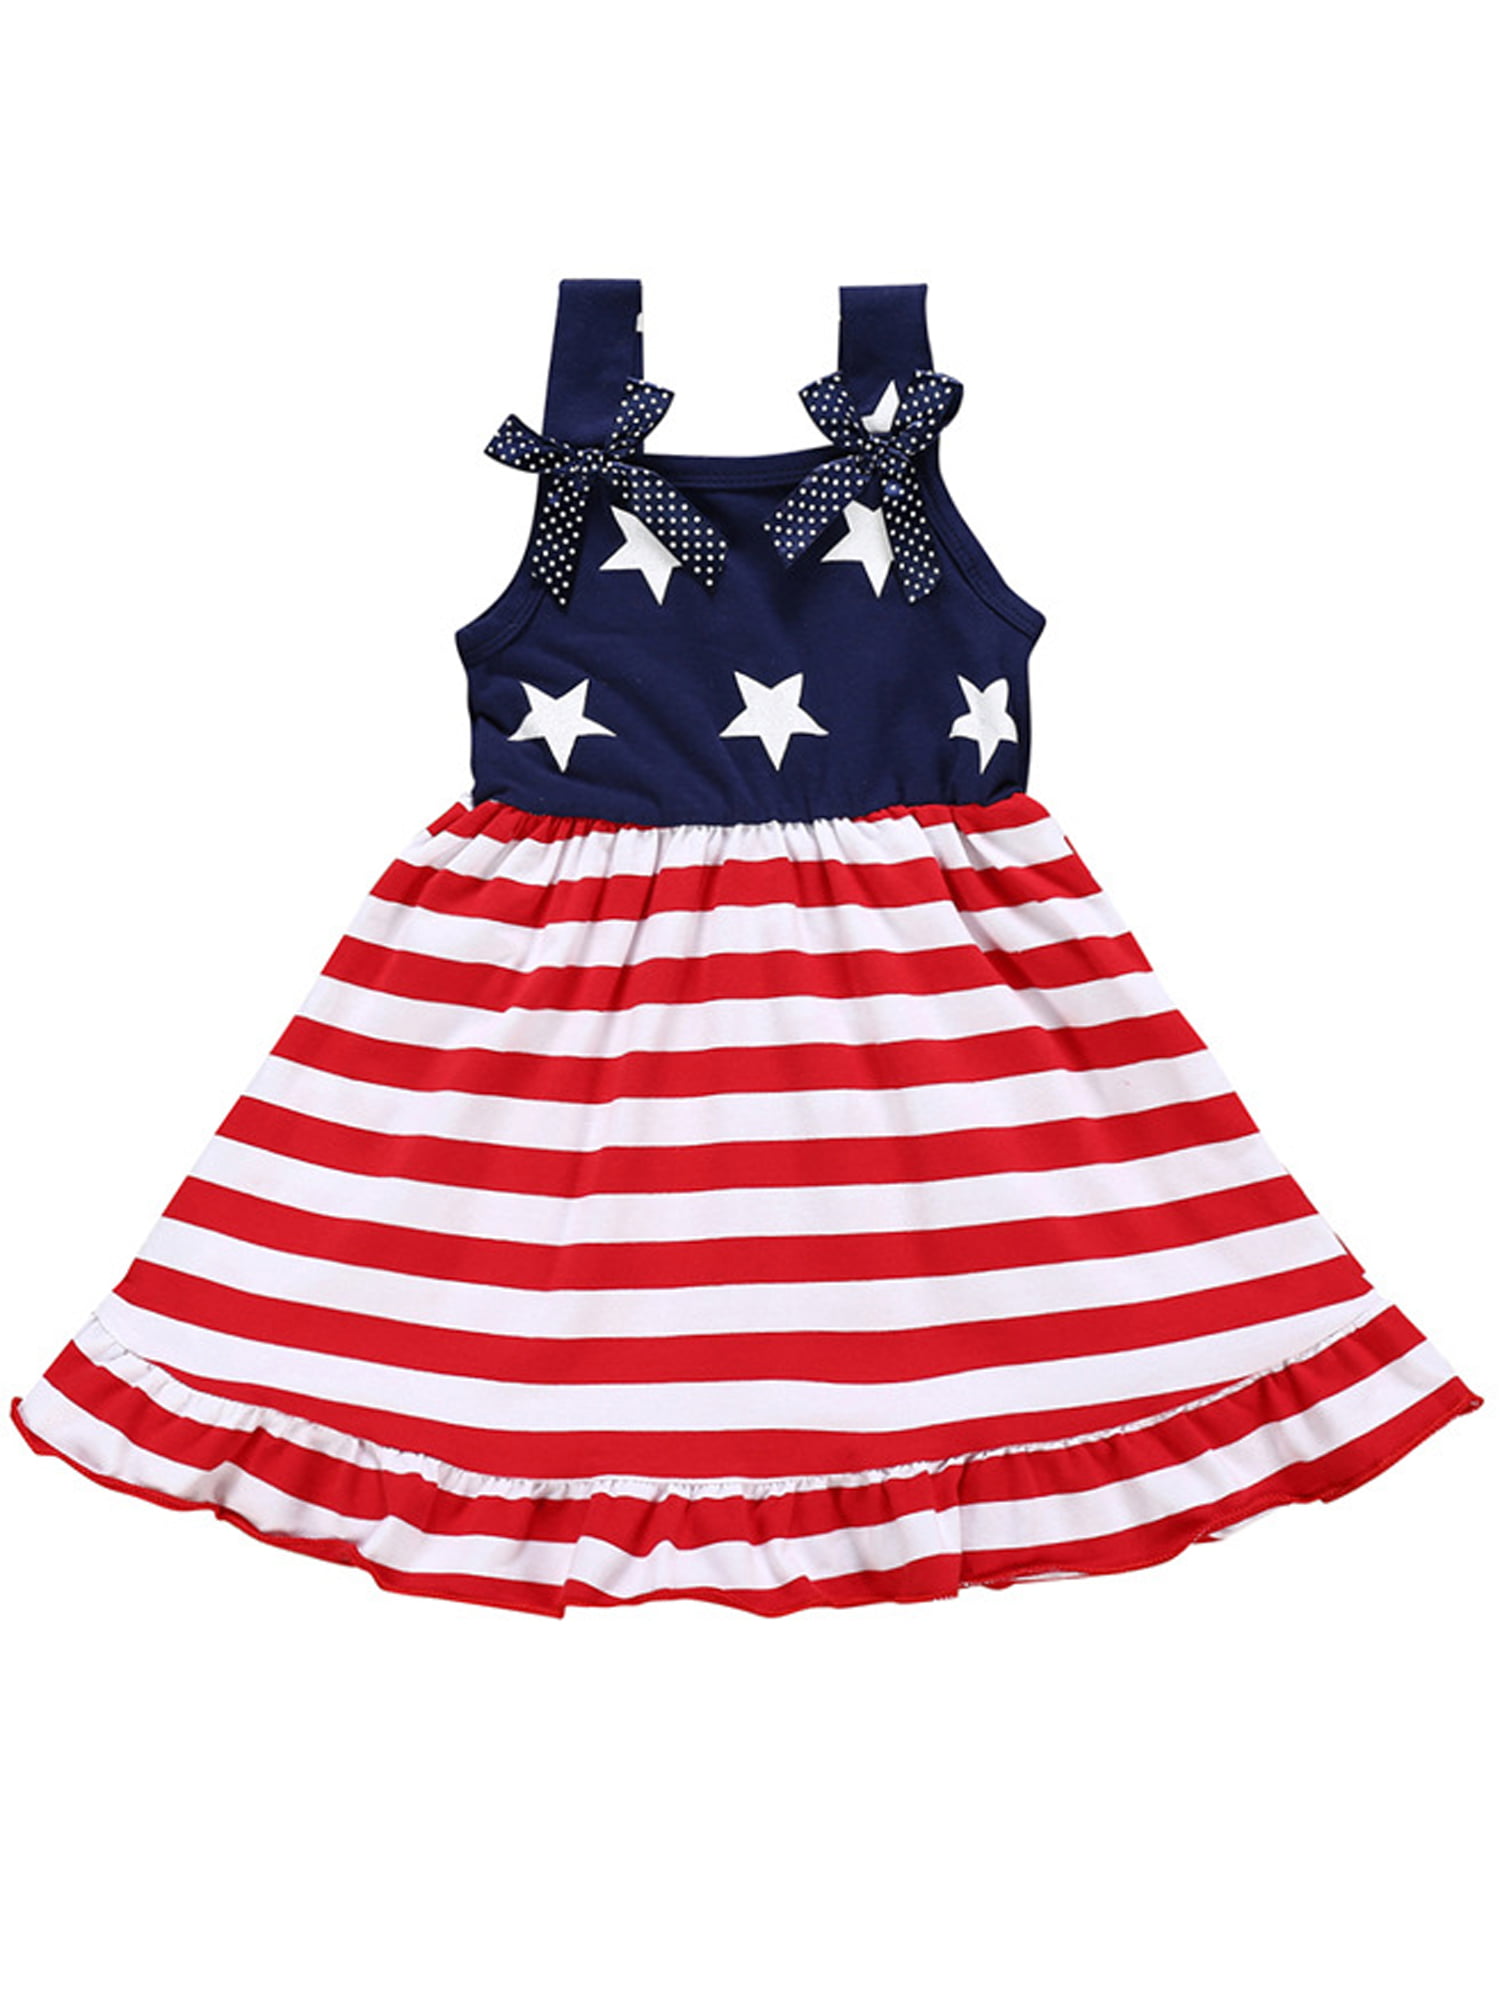 Toddler Baby Kids Girl 4th Of July Star Stripe Dress Party Princess Casual Dress